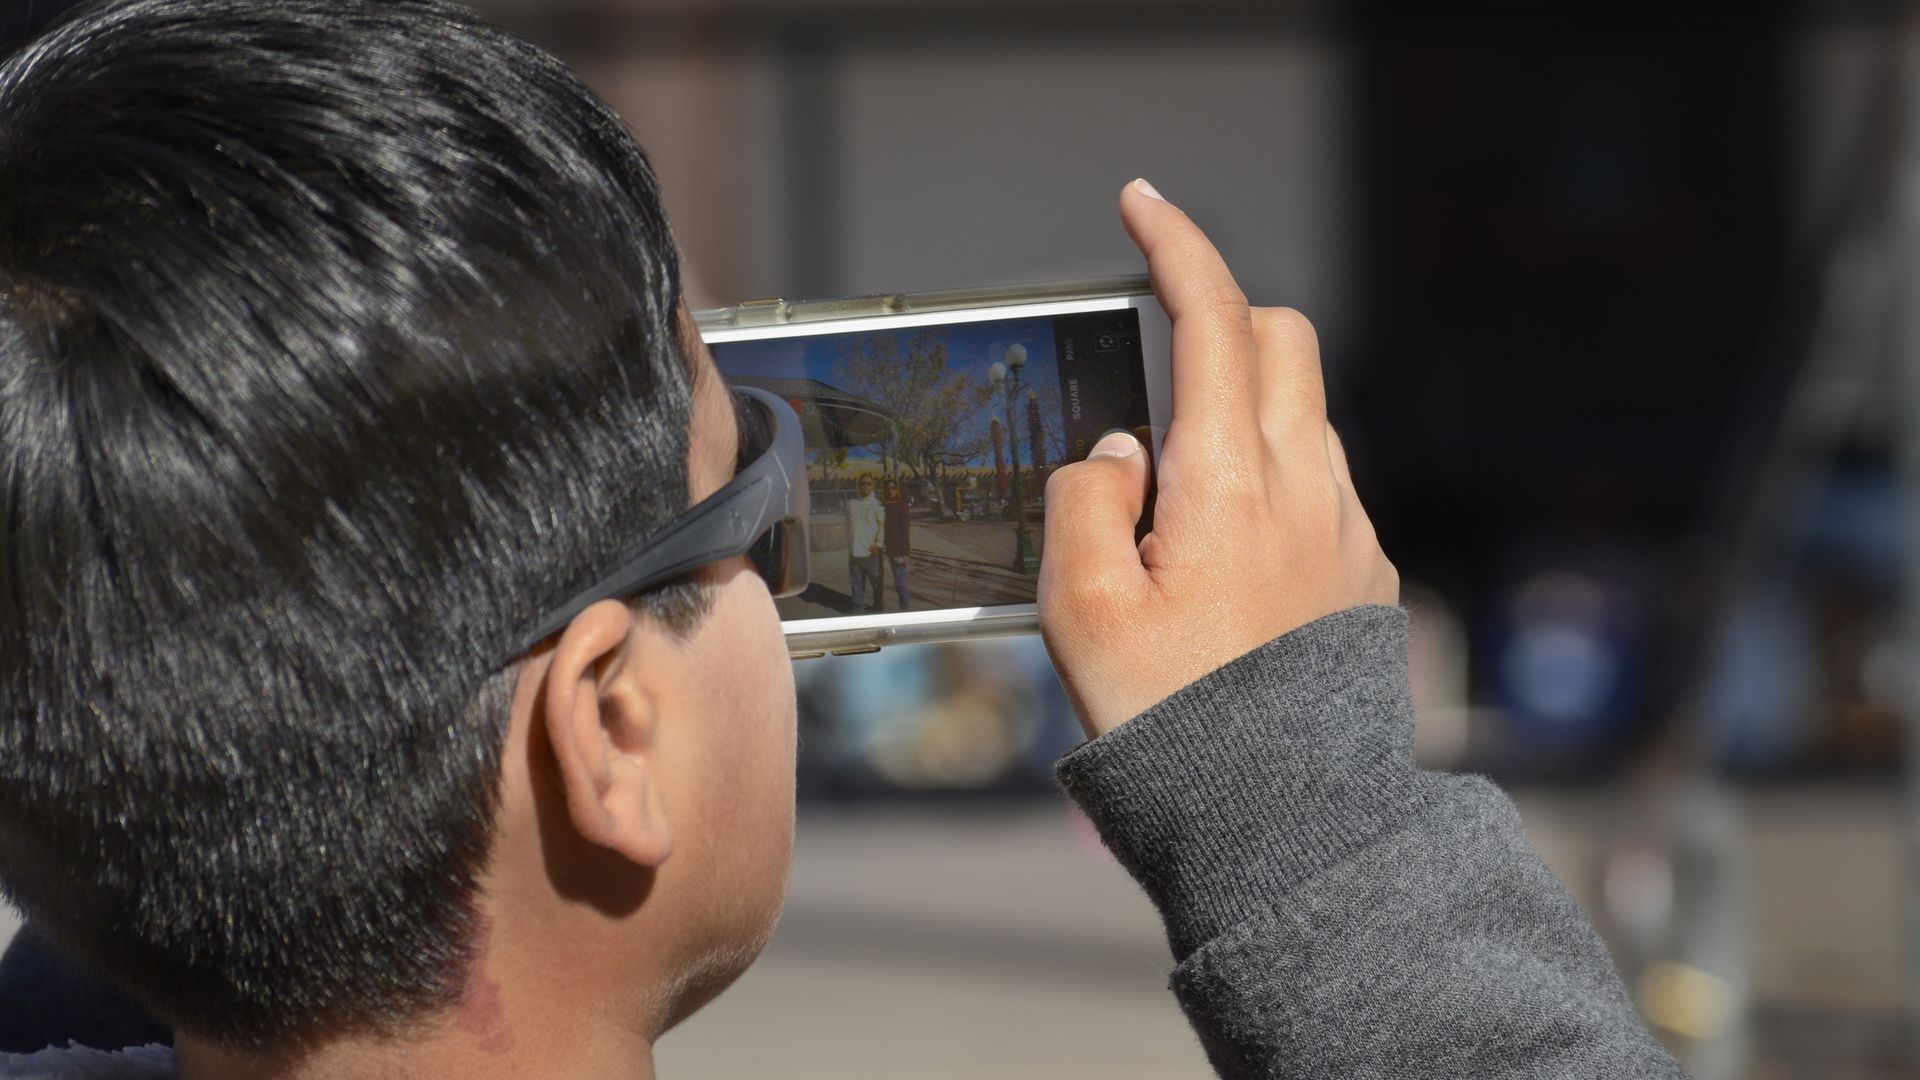 A boy takes a photograph with his smartphone in Santa Fe, New Mexico.